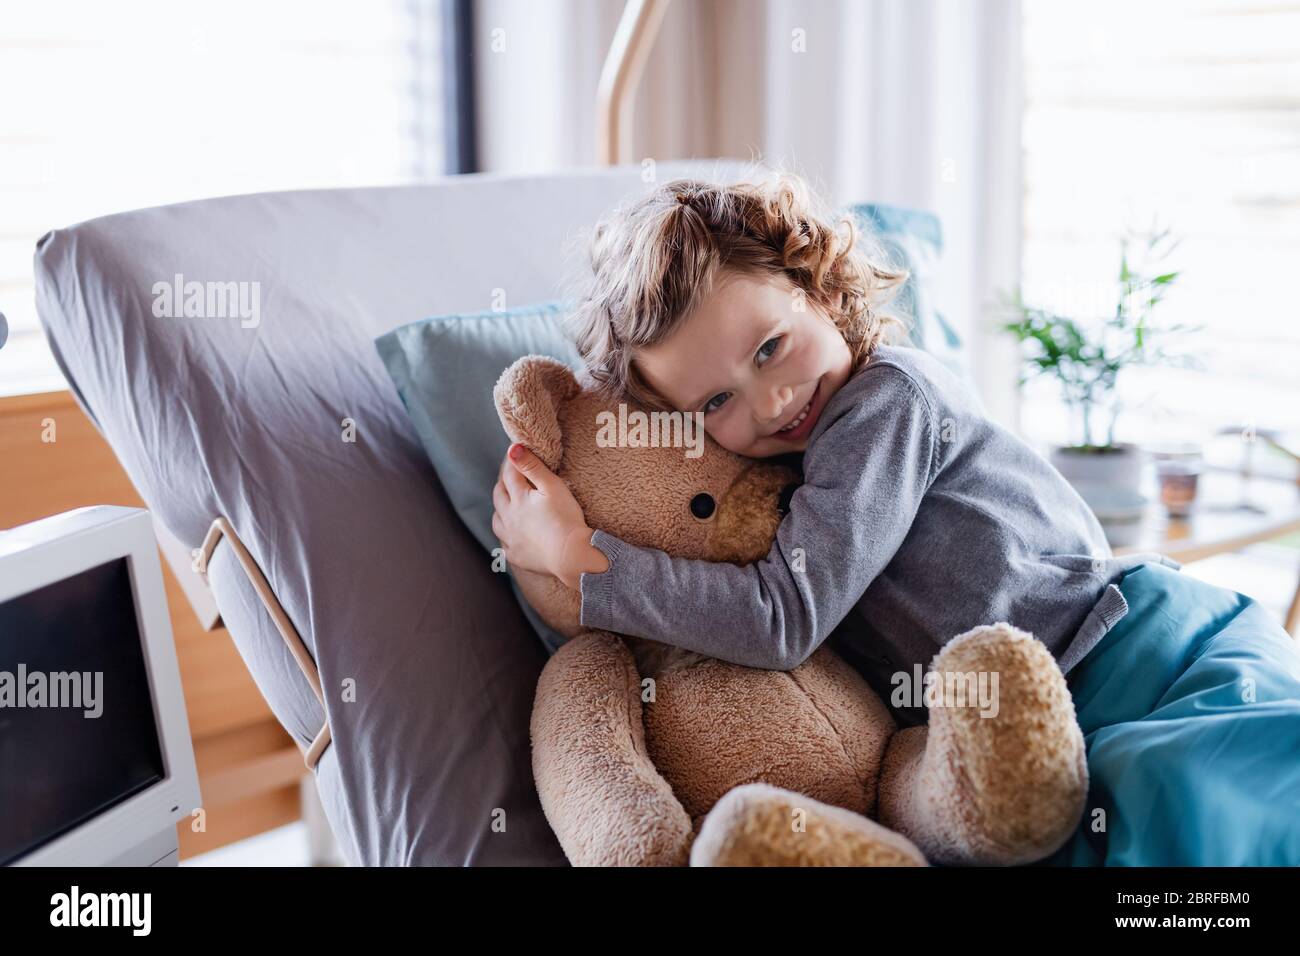 Smiling small girl with teddy bear in bed in hospital. Stock Photo